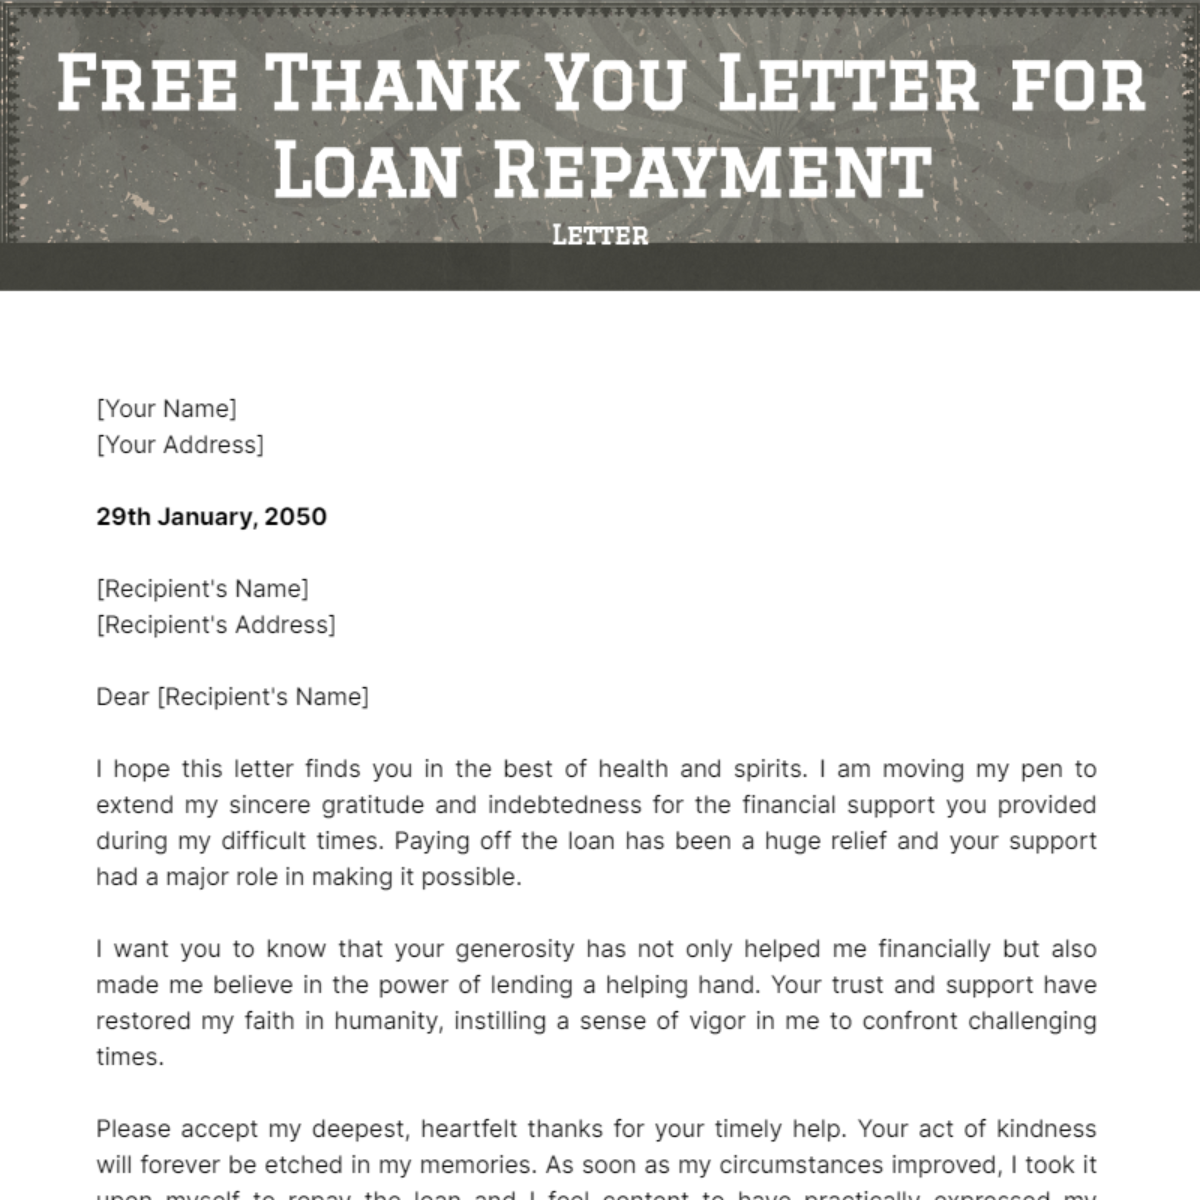 Thank you Letter for Loan Repayment Template